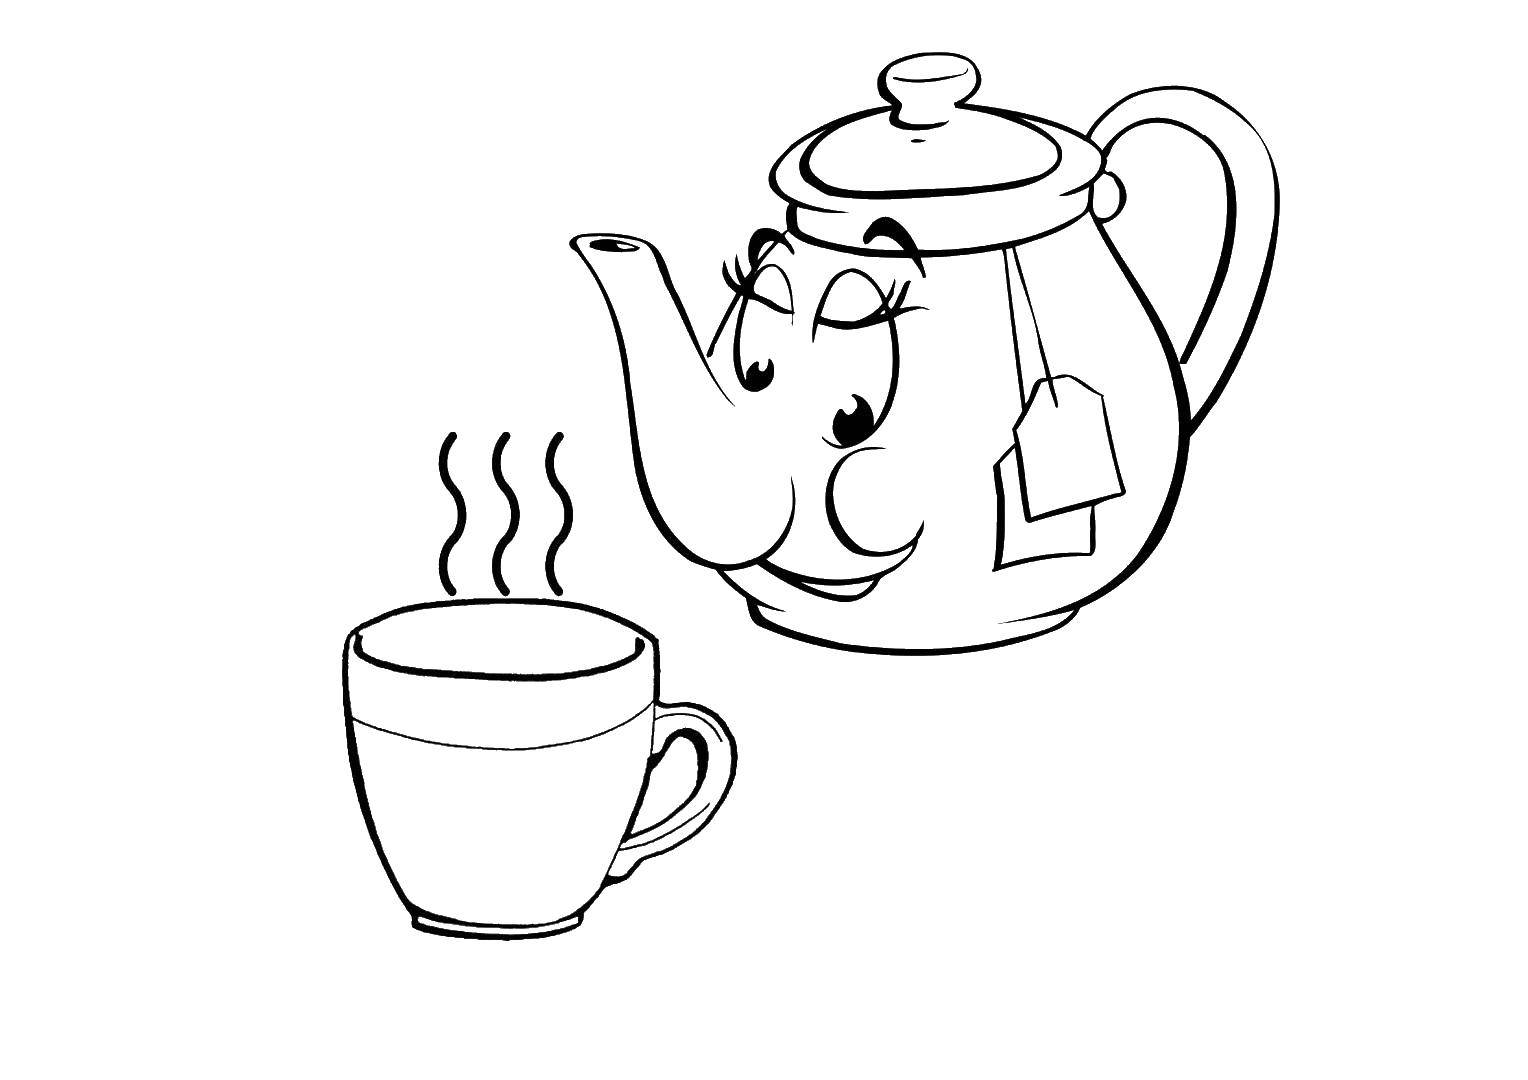 Coloring Teapot with Cup. Category dishes. Tags:  kettle, Cup.